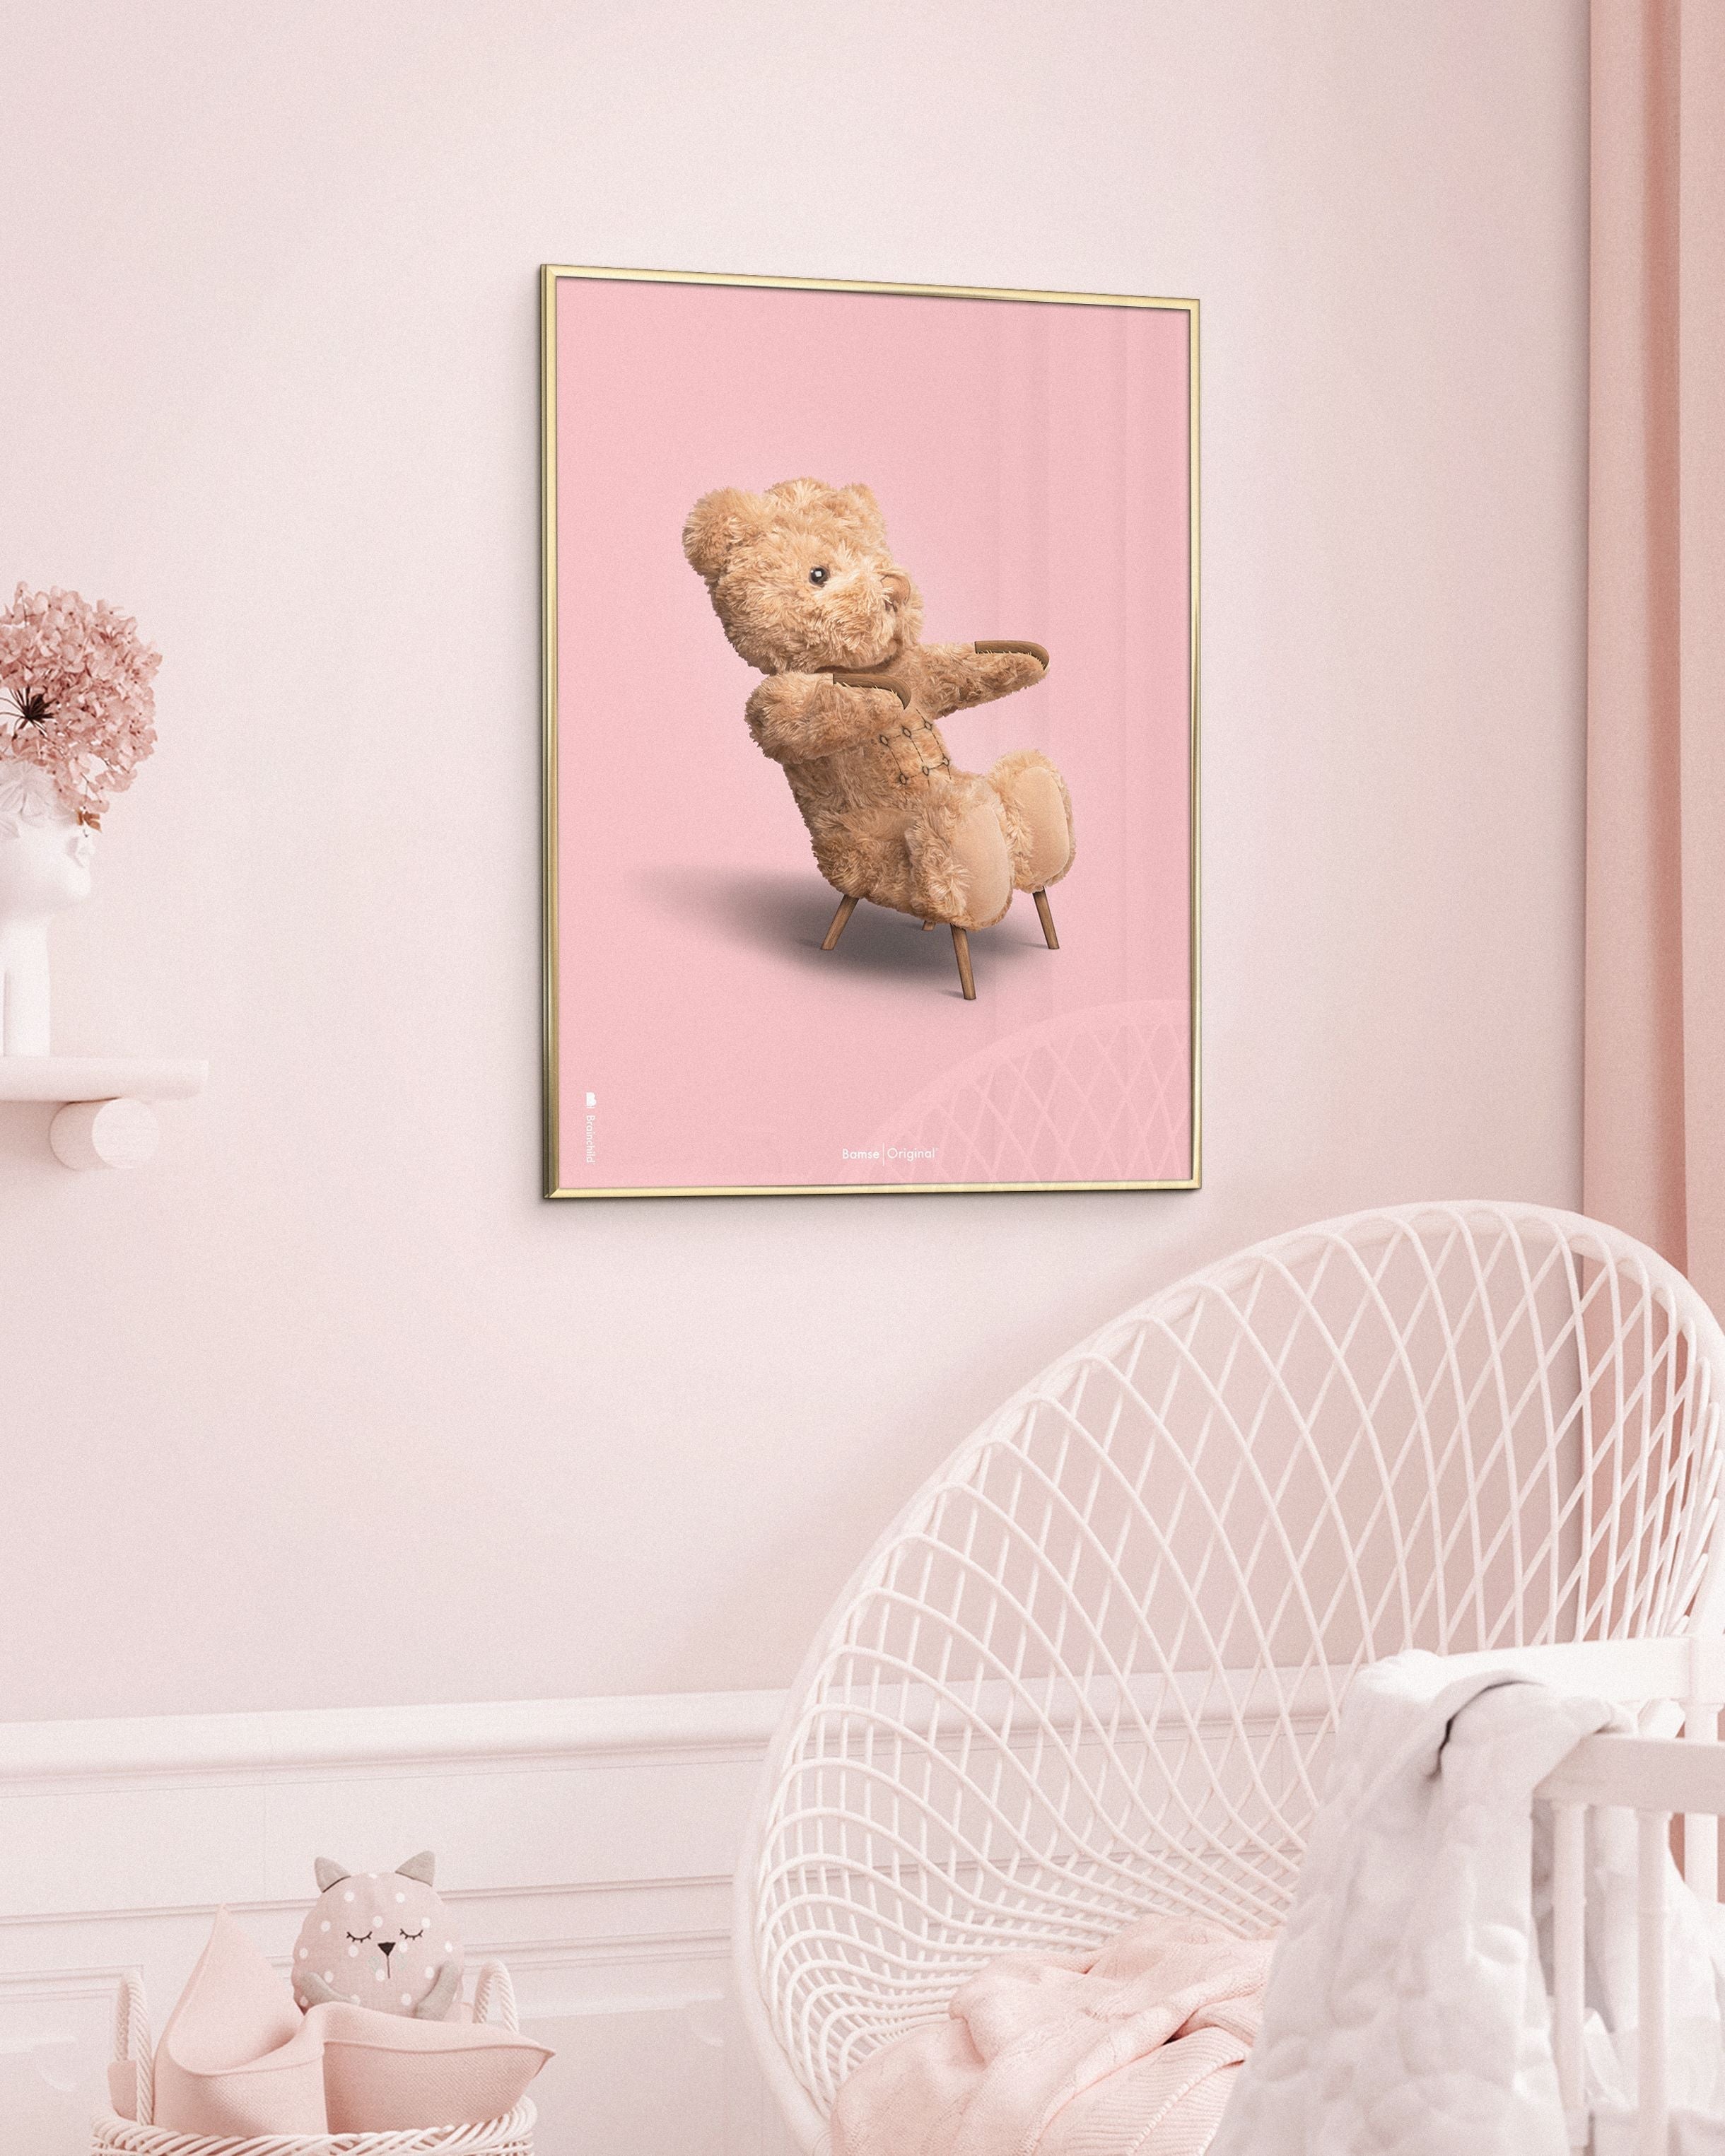 Brainchild Teddy Bear Classic Poster Without Frame 30x40 Cm, Pink Background